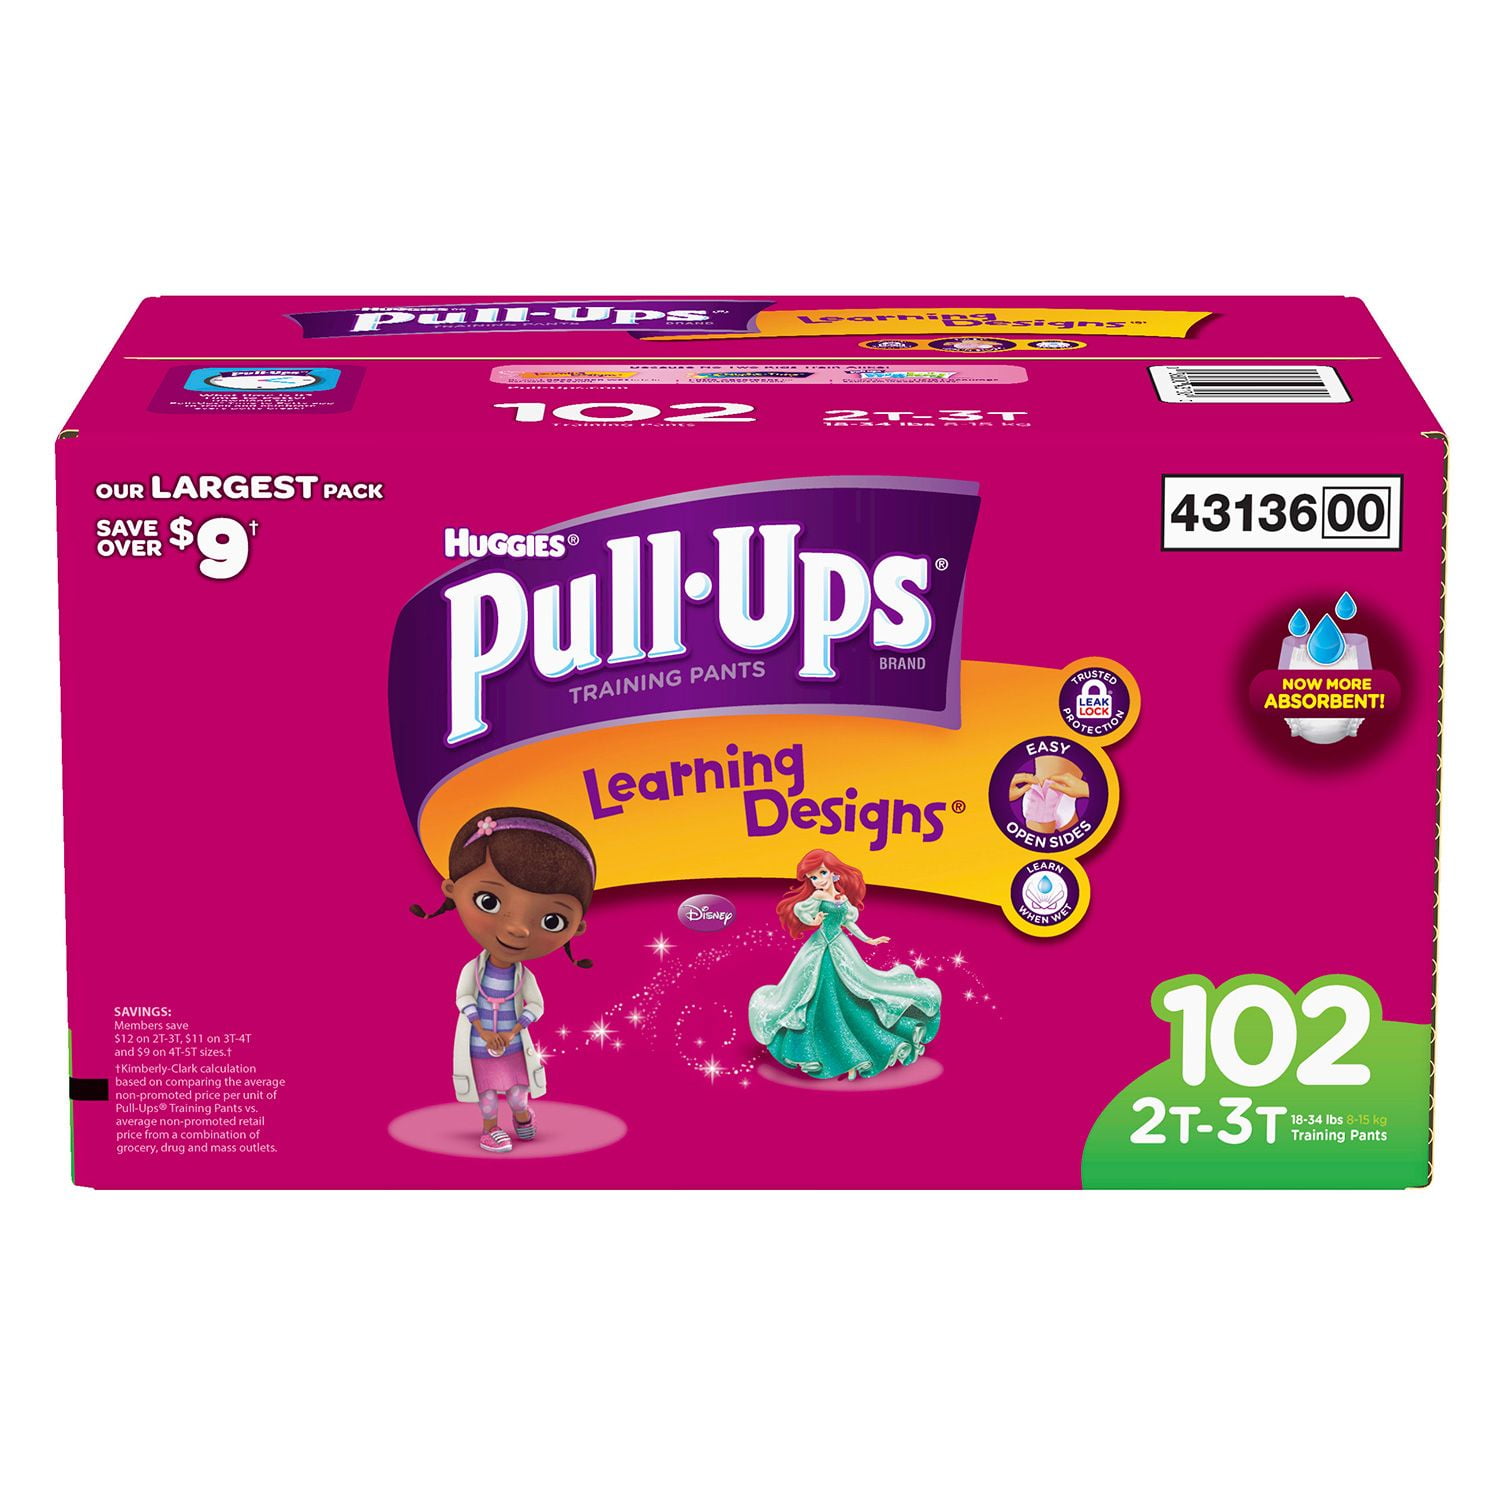 Huggies Pull-Ups Training Pants for Girls 102 Count M 2T-3T